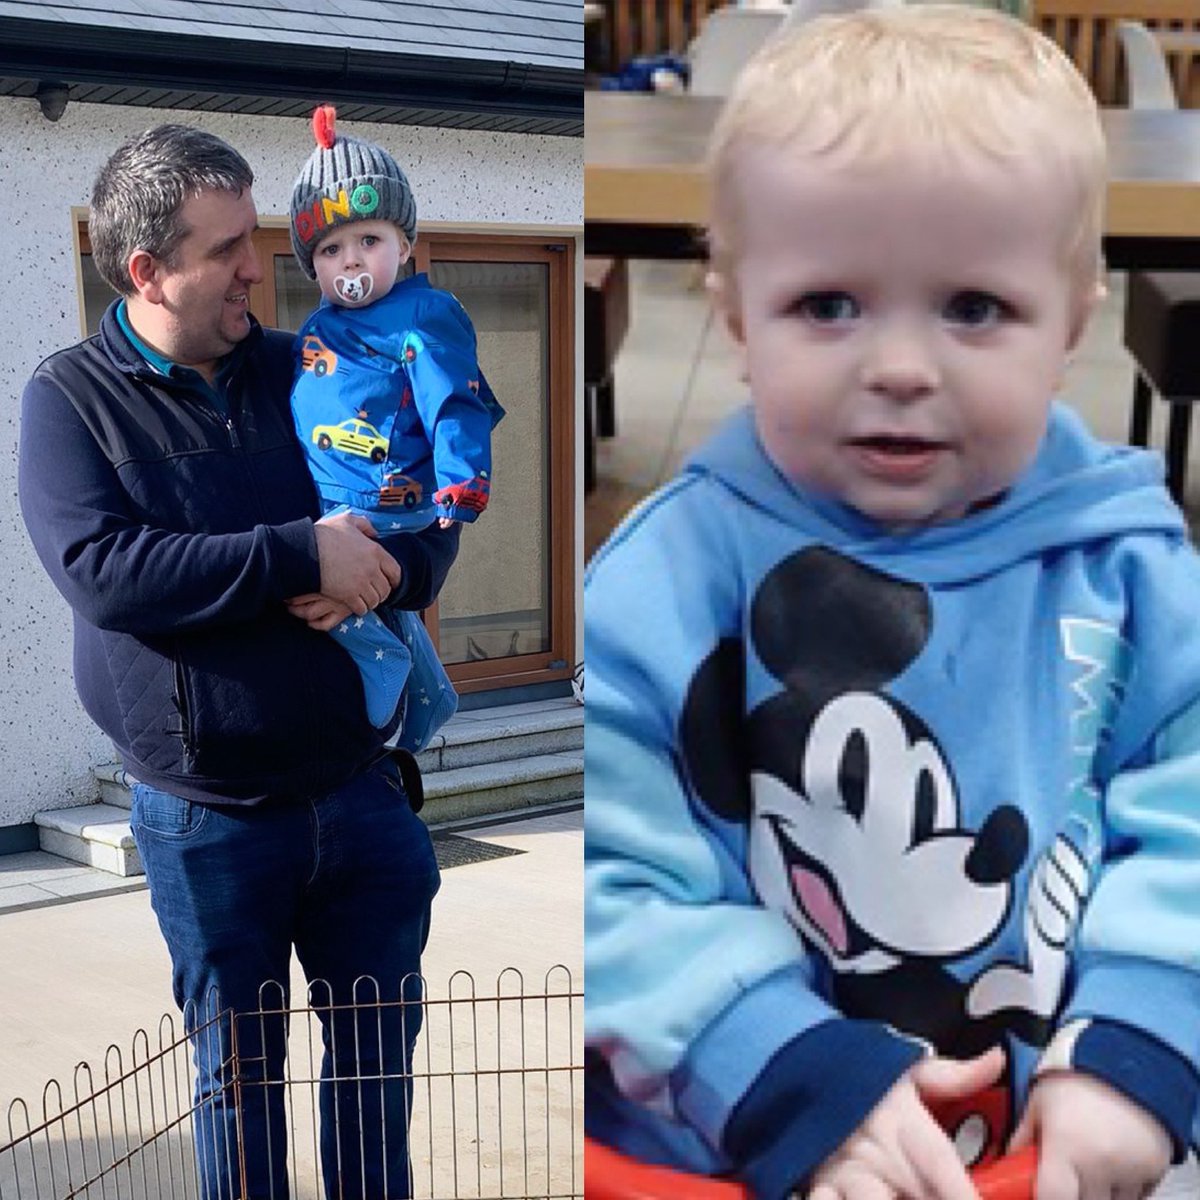 We’re so saddened to learn that Eoin has passed after a courageous journey with liver cancer. He would have turned 3 this weekend. We send our deepest condolences to his adoring parents Orla and Paul, his brother Jamie and to all who love him. He will always be in Oscar’s club💛